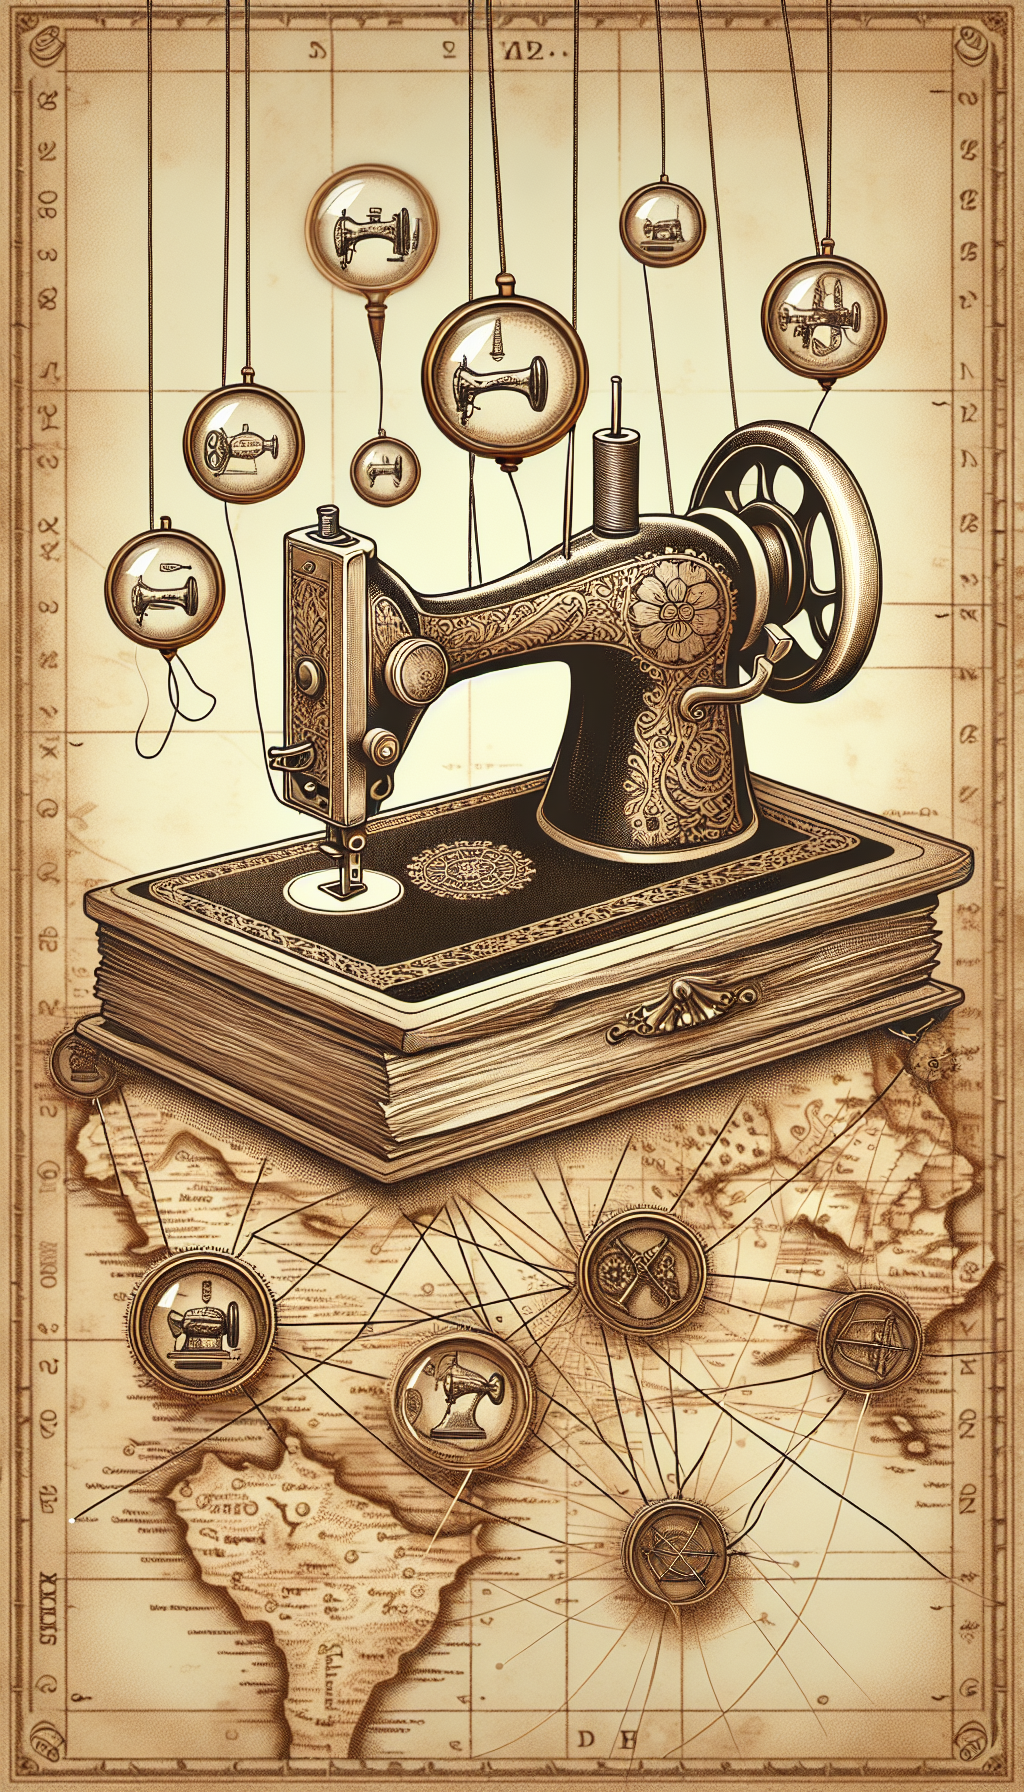 An intricate line-drawn sepia illustration depicts a vintage sewing machine, with delicate floral patterns etched onto its sides, perched atop an old map. Golden threads highlighting routes connect symbols marking treasure spots, each subtly shaped like different classic sewing machines. Tiny magnifying glasses hover over, symbolizing the search for value in sewing nostalgia.